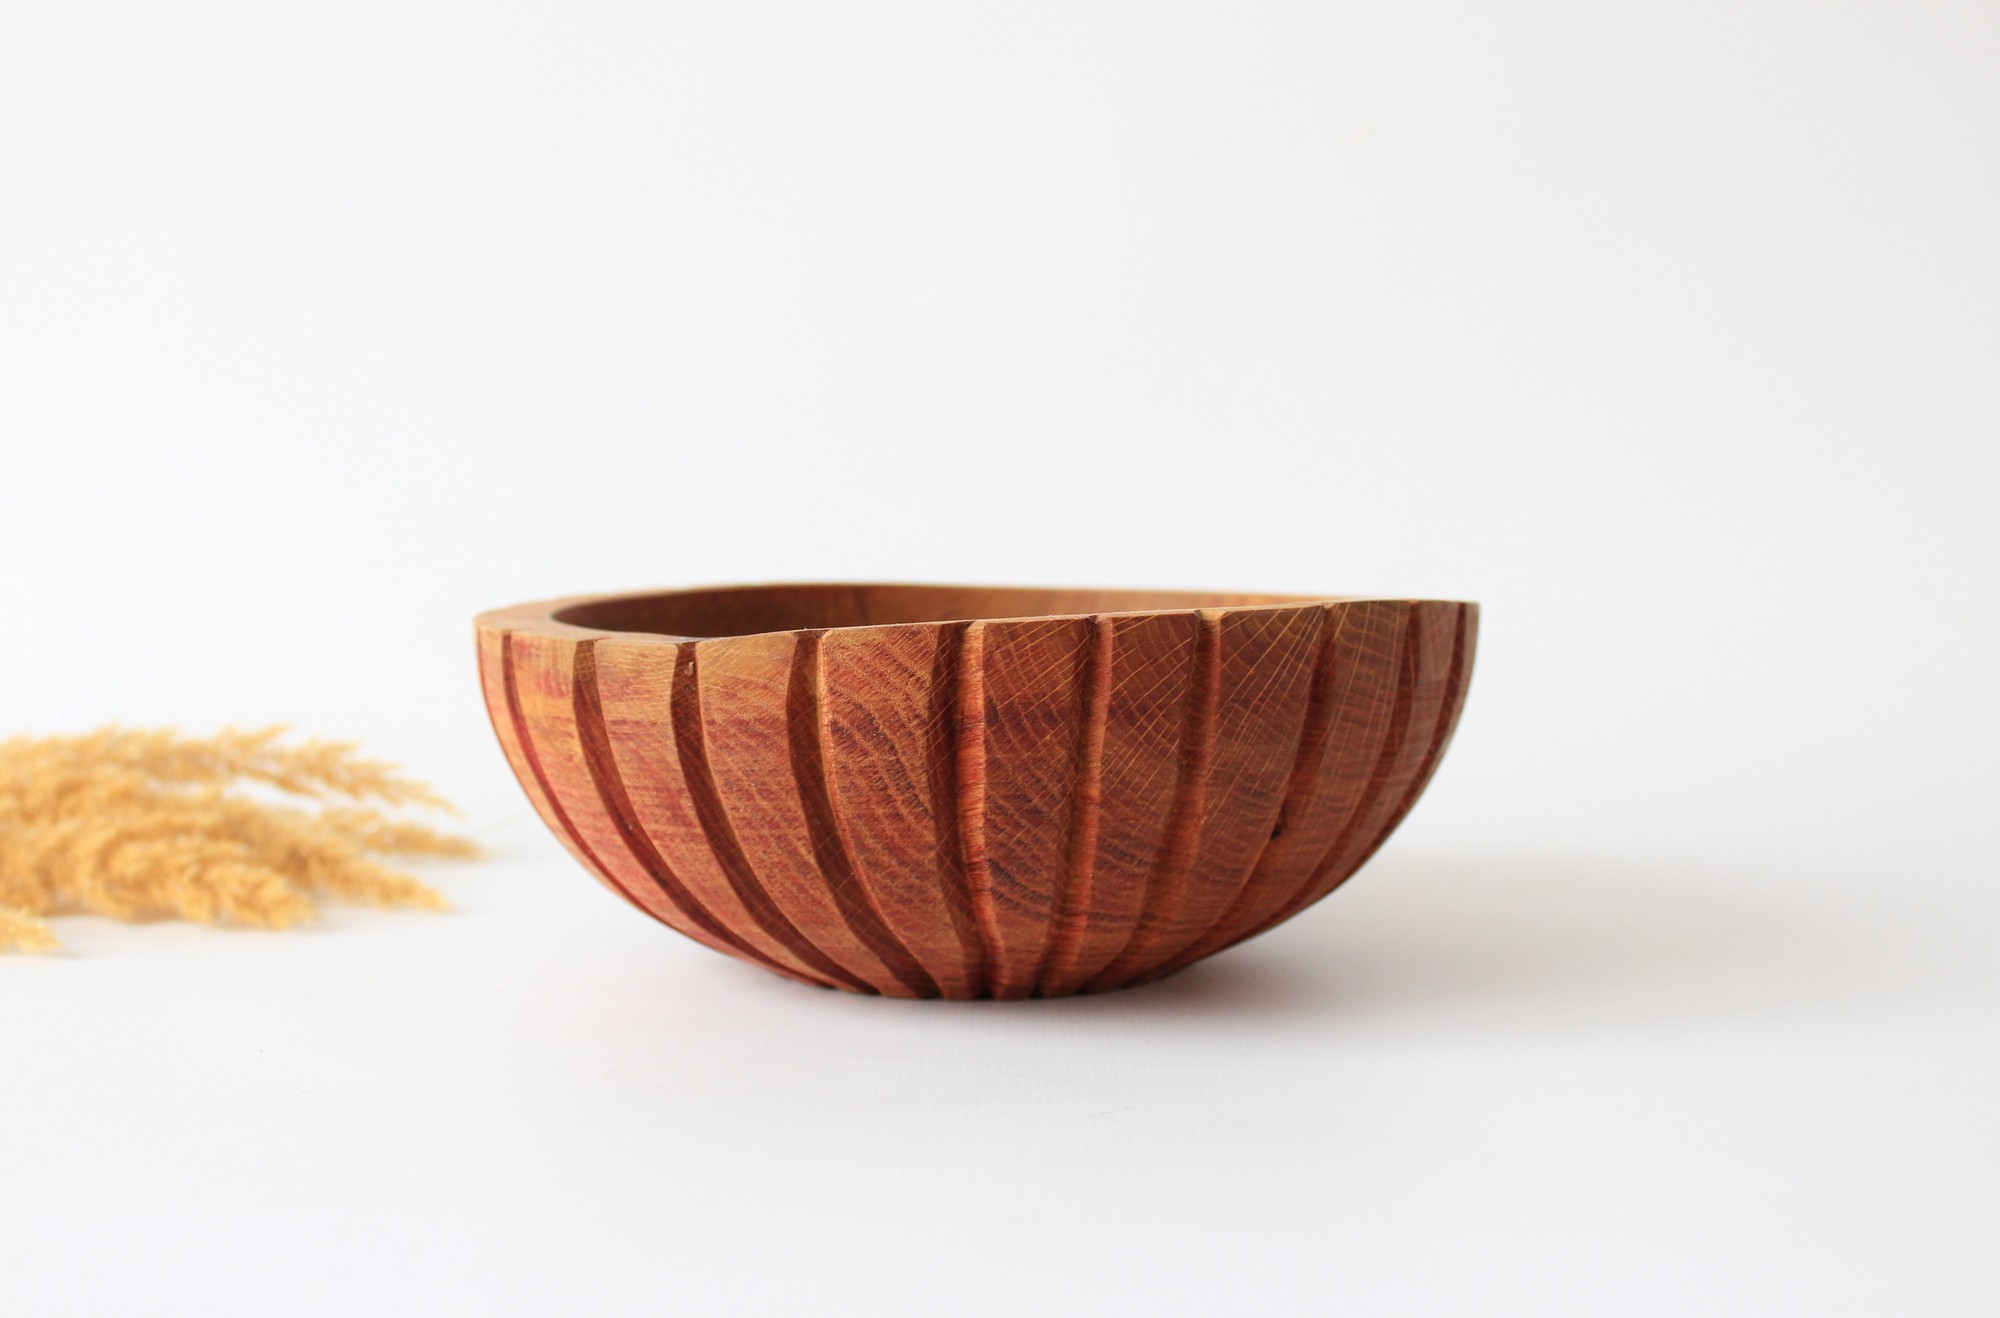 Small decorative bowl, unique wooden bowl for candy